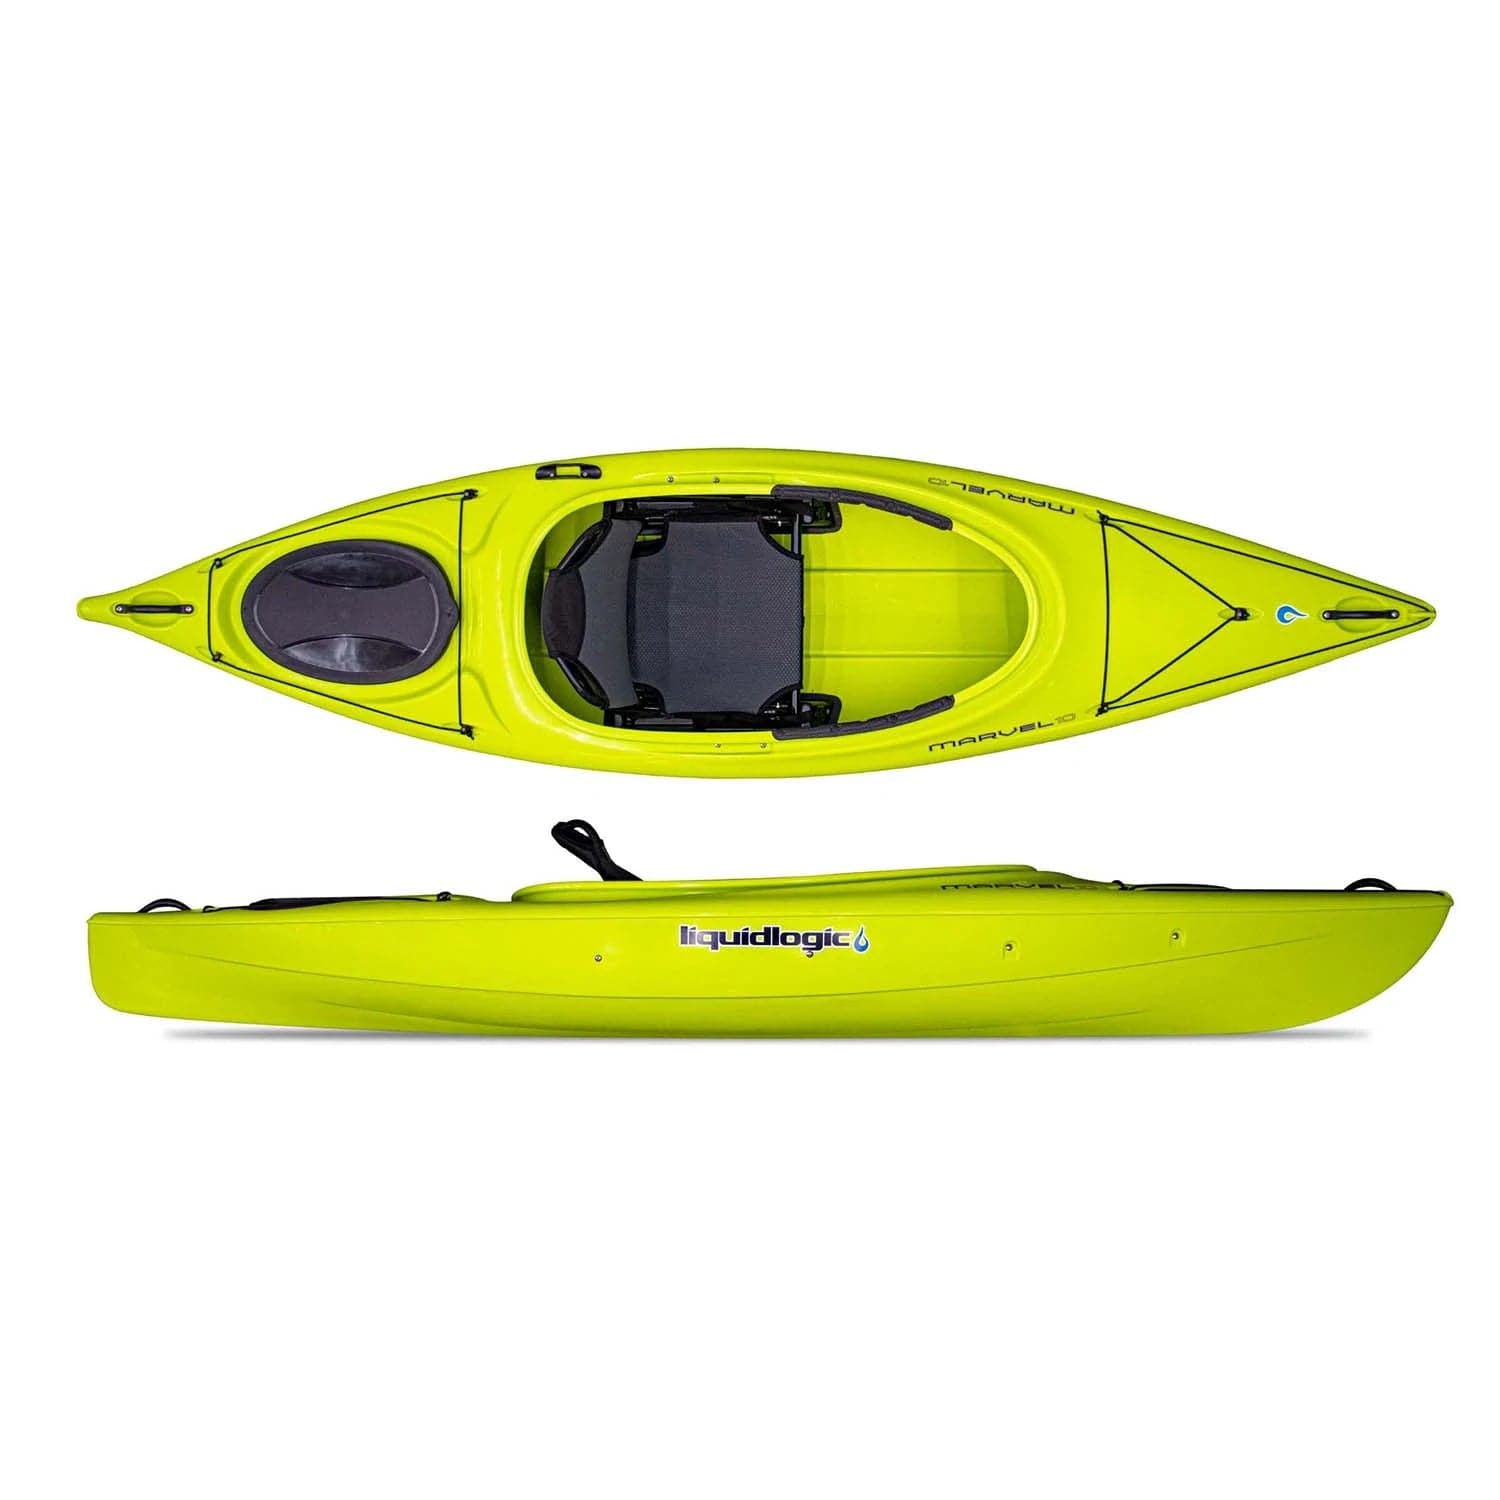 Featuring the Marvel 10' and 12' sit-inside rec / touring kayak manufactured by LiquidLogic shown here from a third angle.